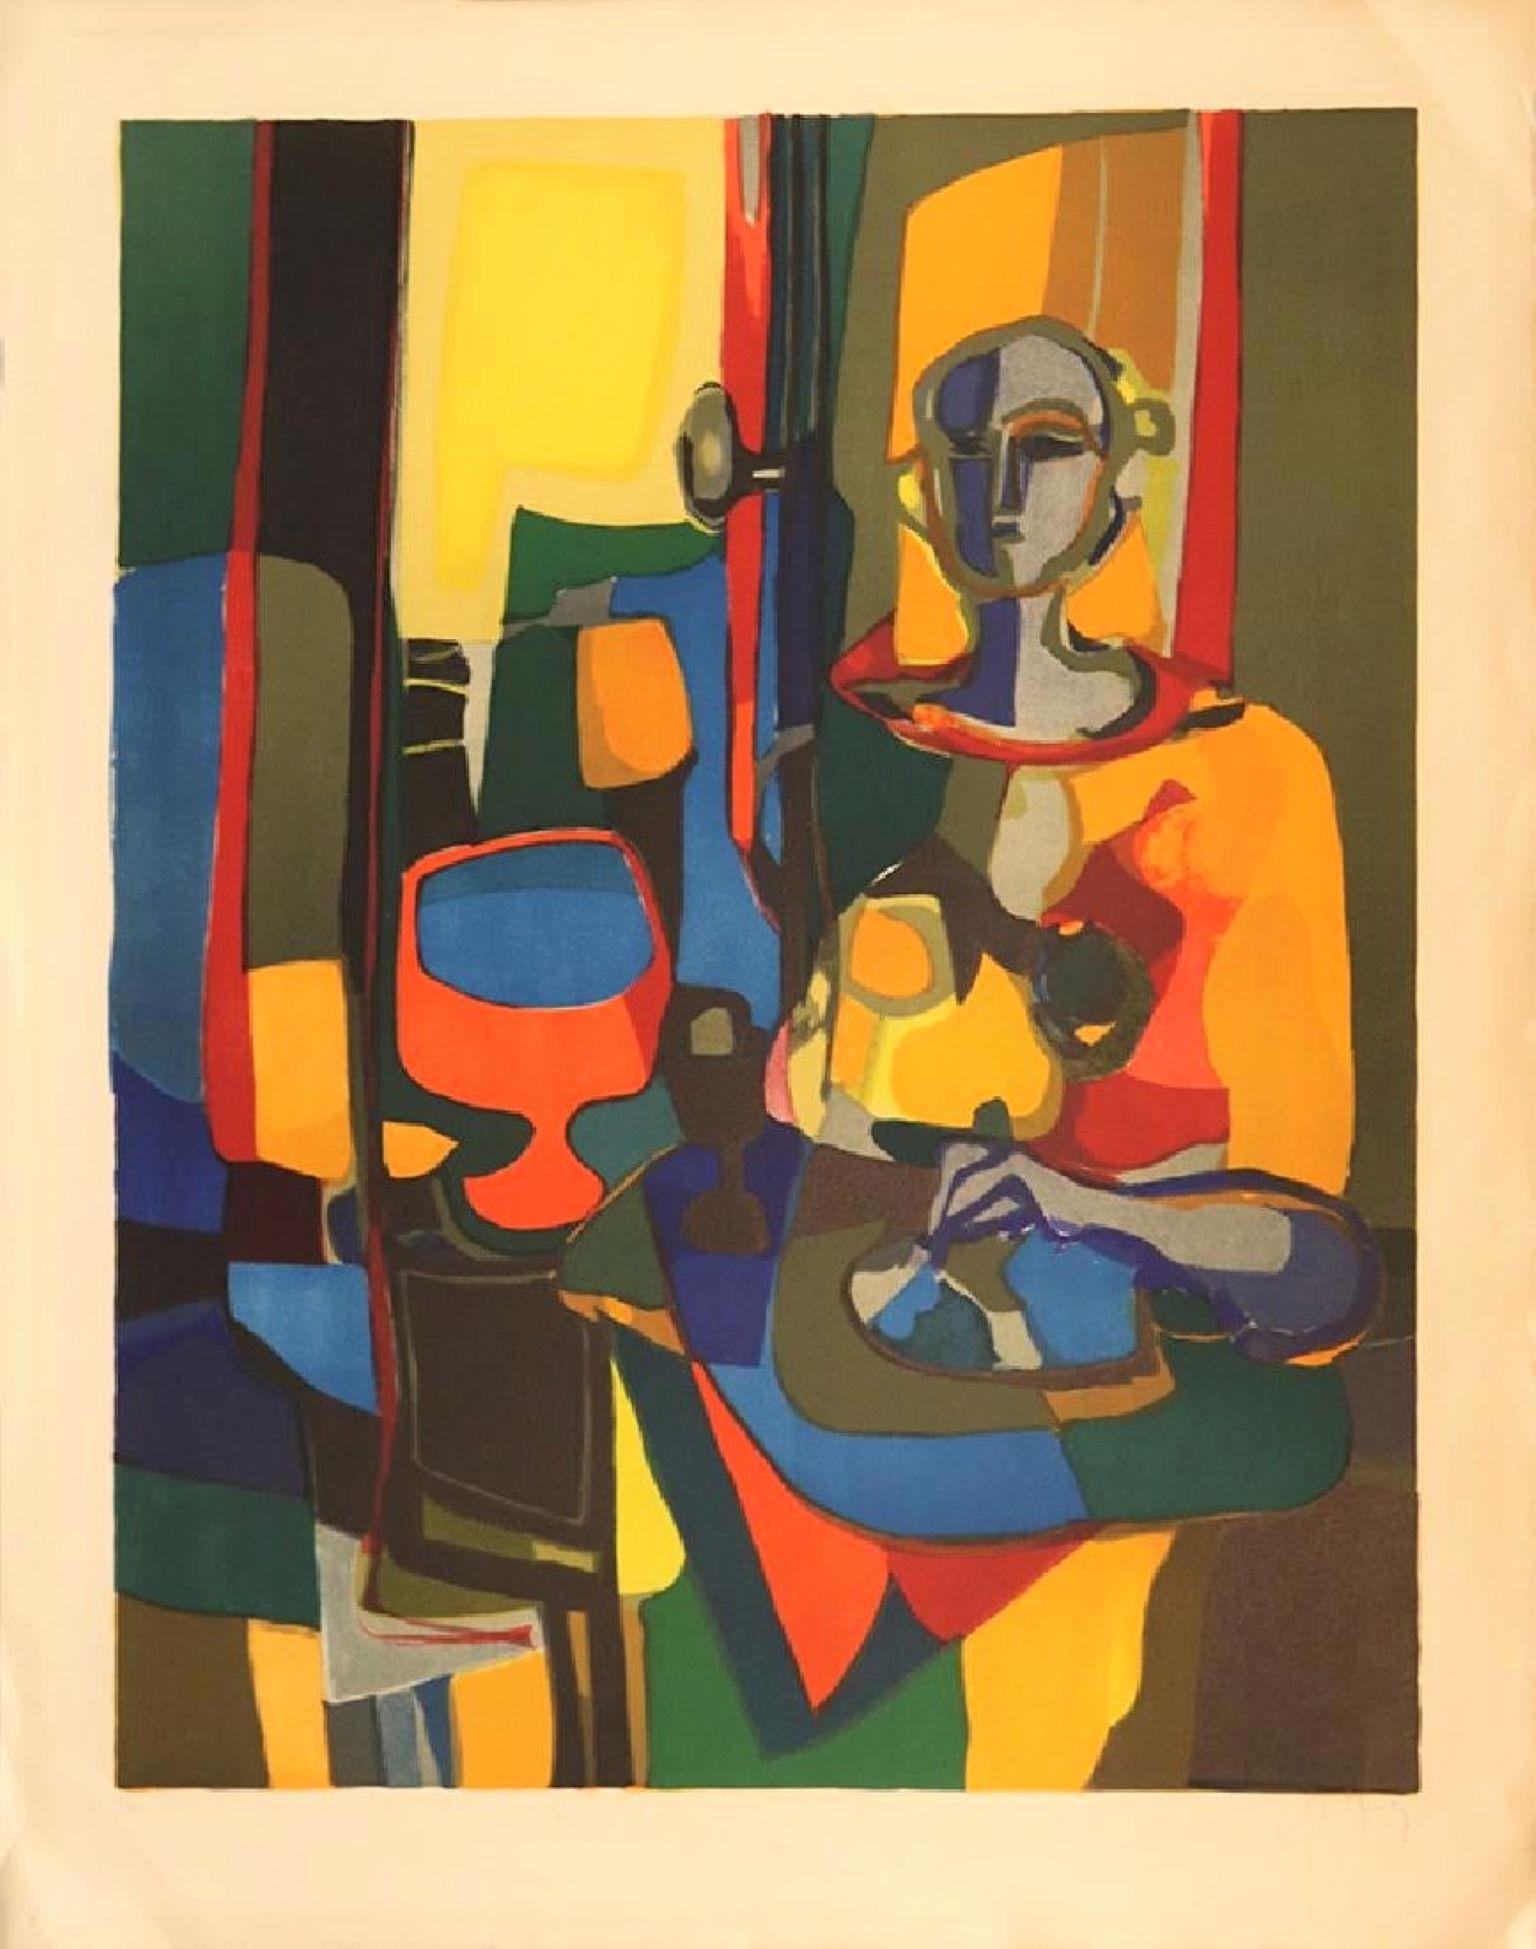 "Femme" by Marcel Mouly-Signed and Numbered, Limited Edition Lithograph